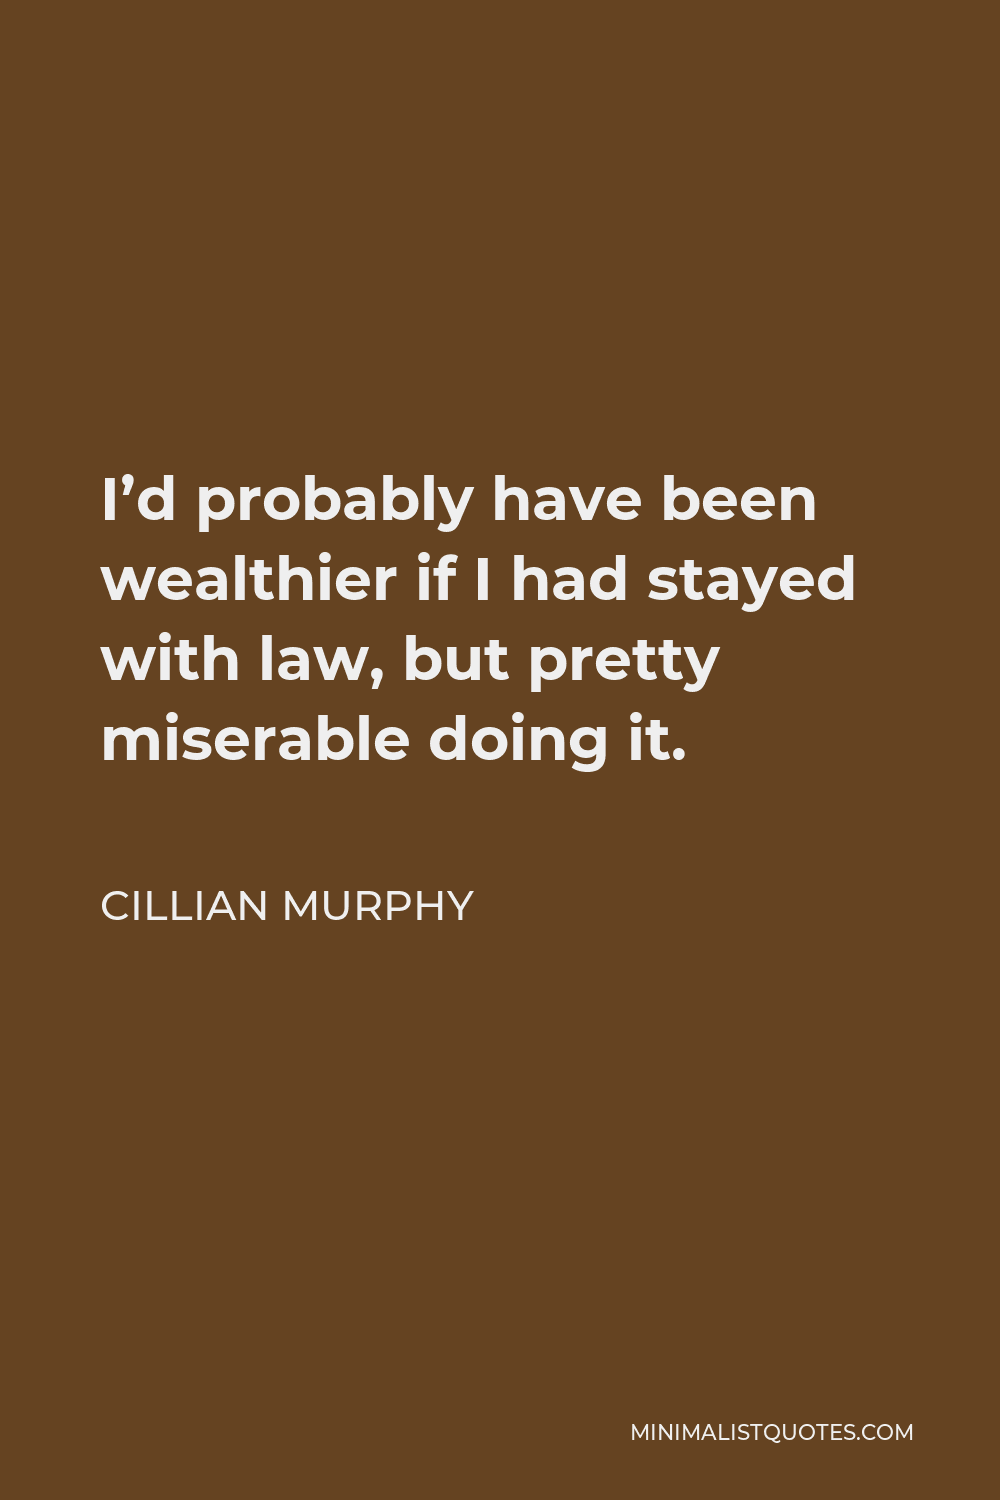 Cillian Murphy Quote - I’d probably have been wealthier if I had stayed with law, but pretty miserable doing it.